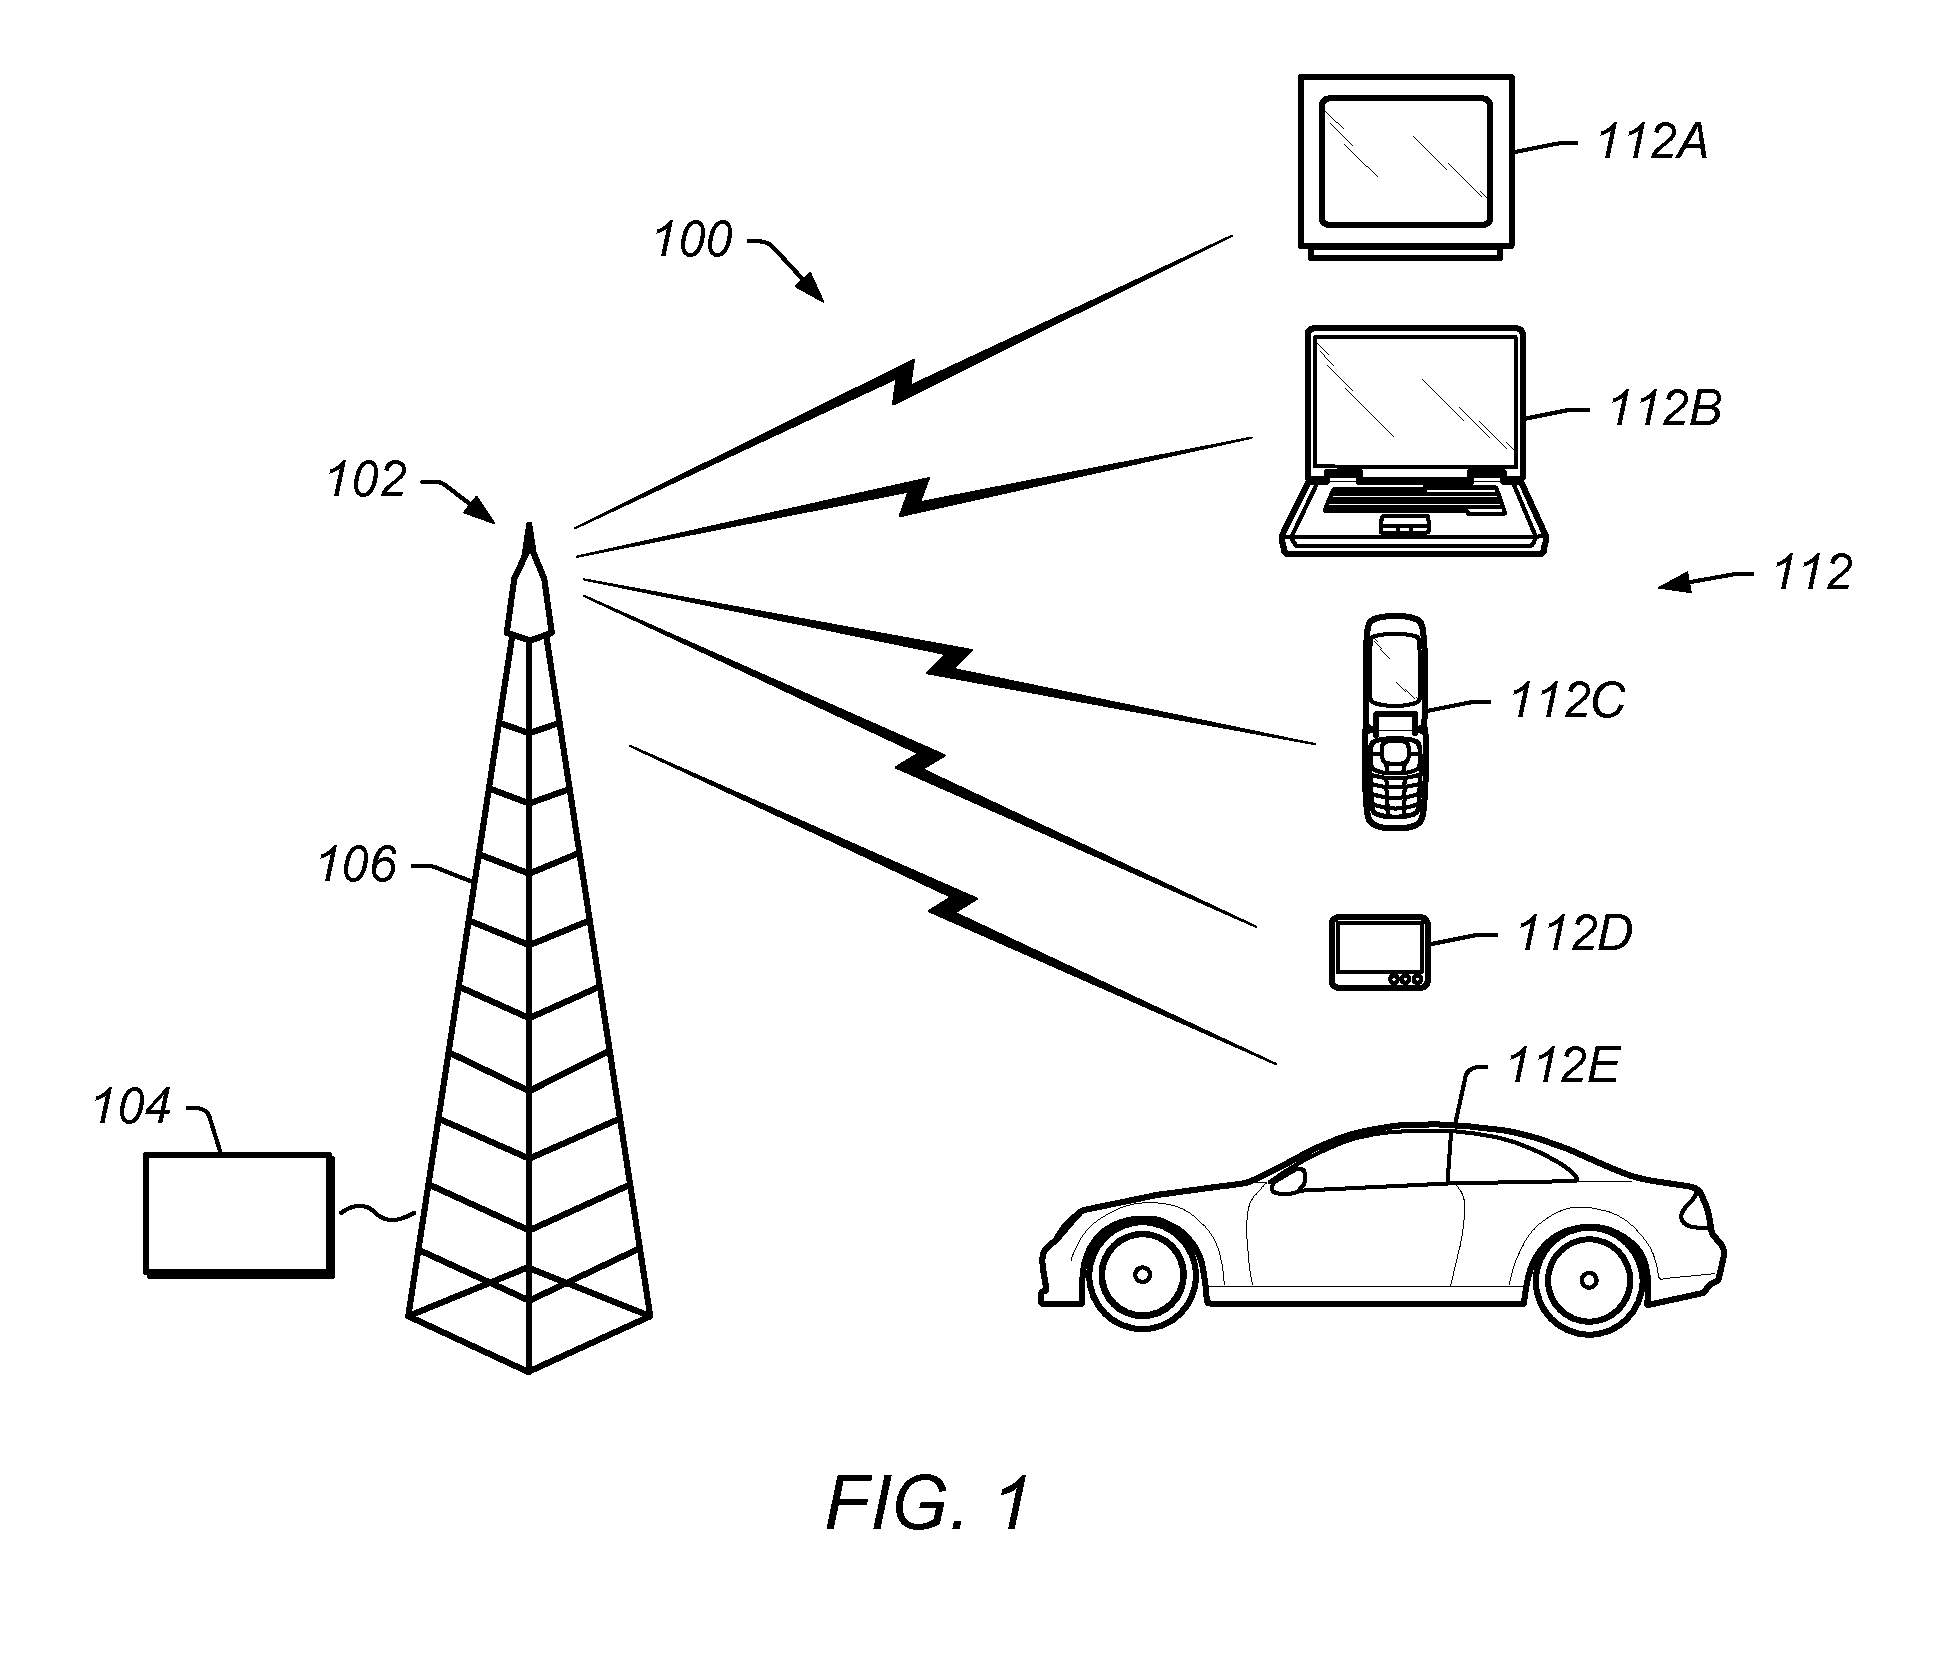 Transmitting and Receiving Control Information for Use with Multimedia Streams